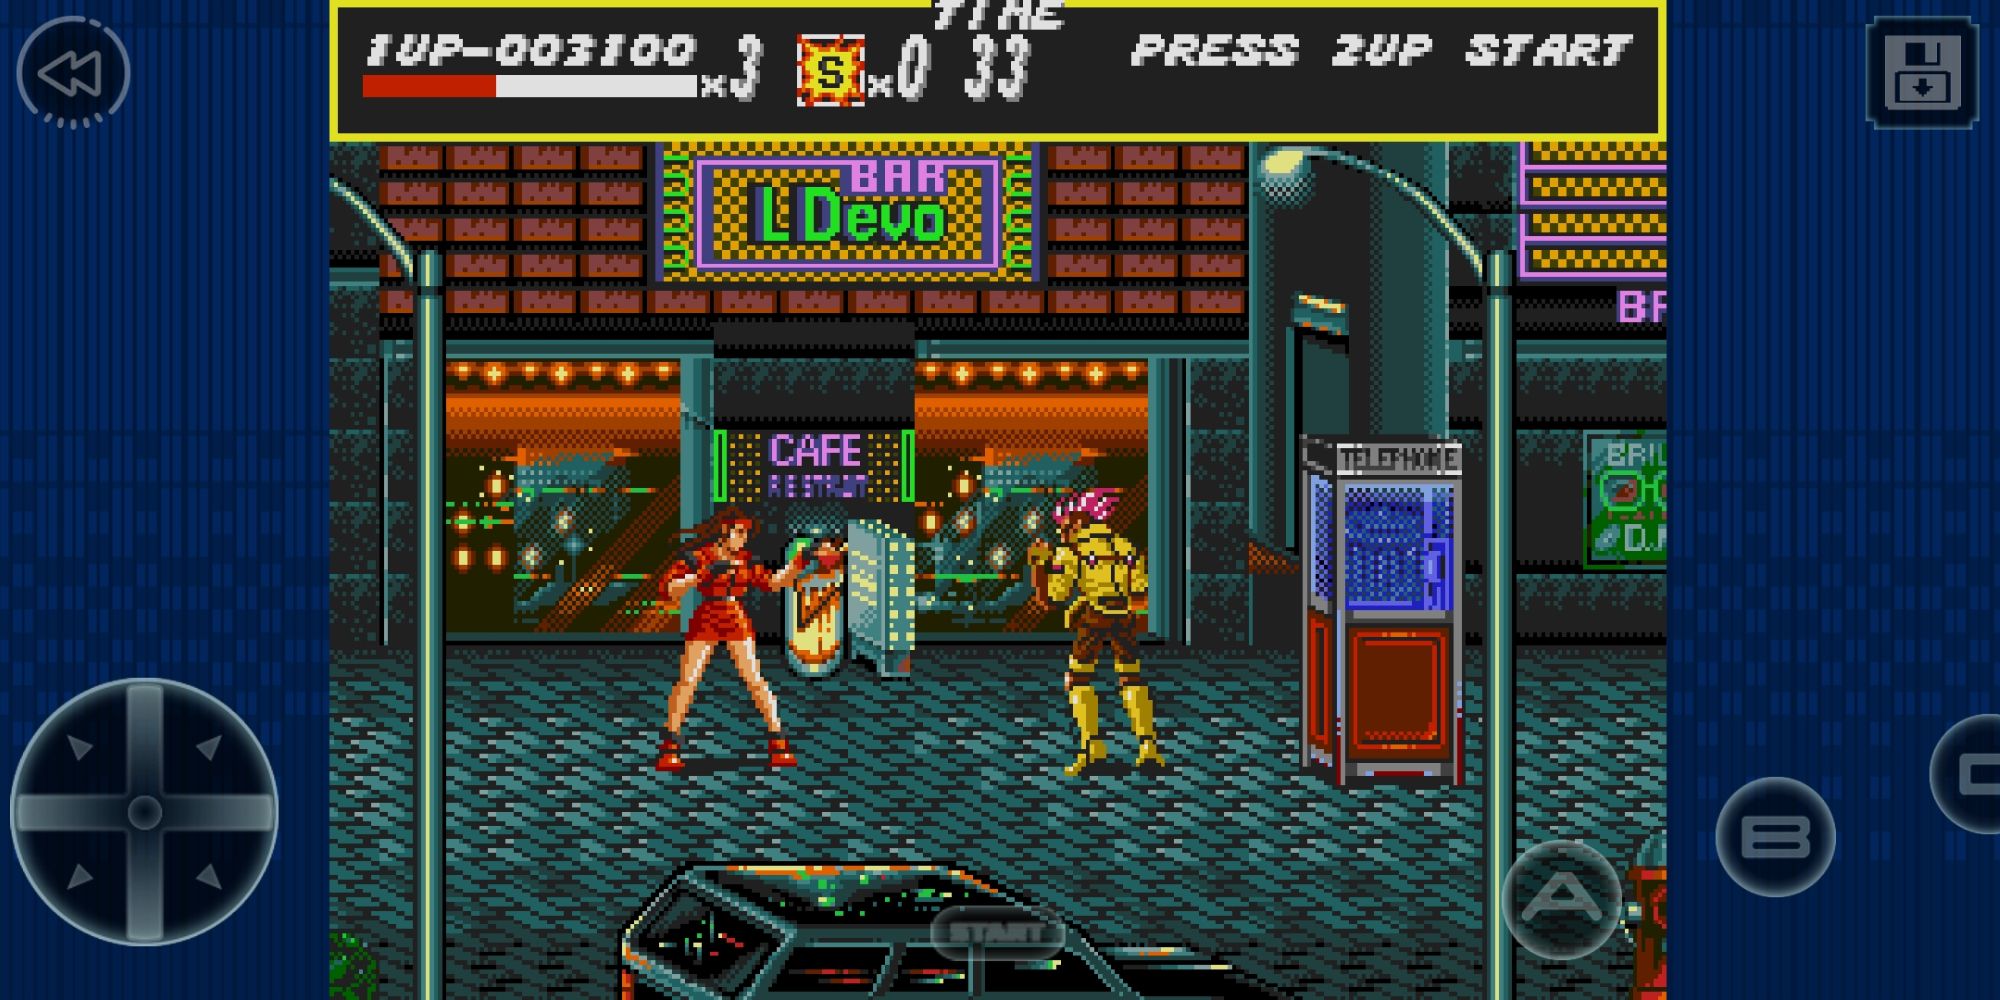 Blaze From Streets Of Rage Fighting